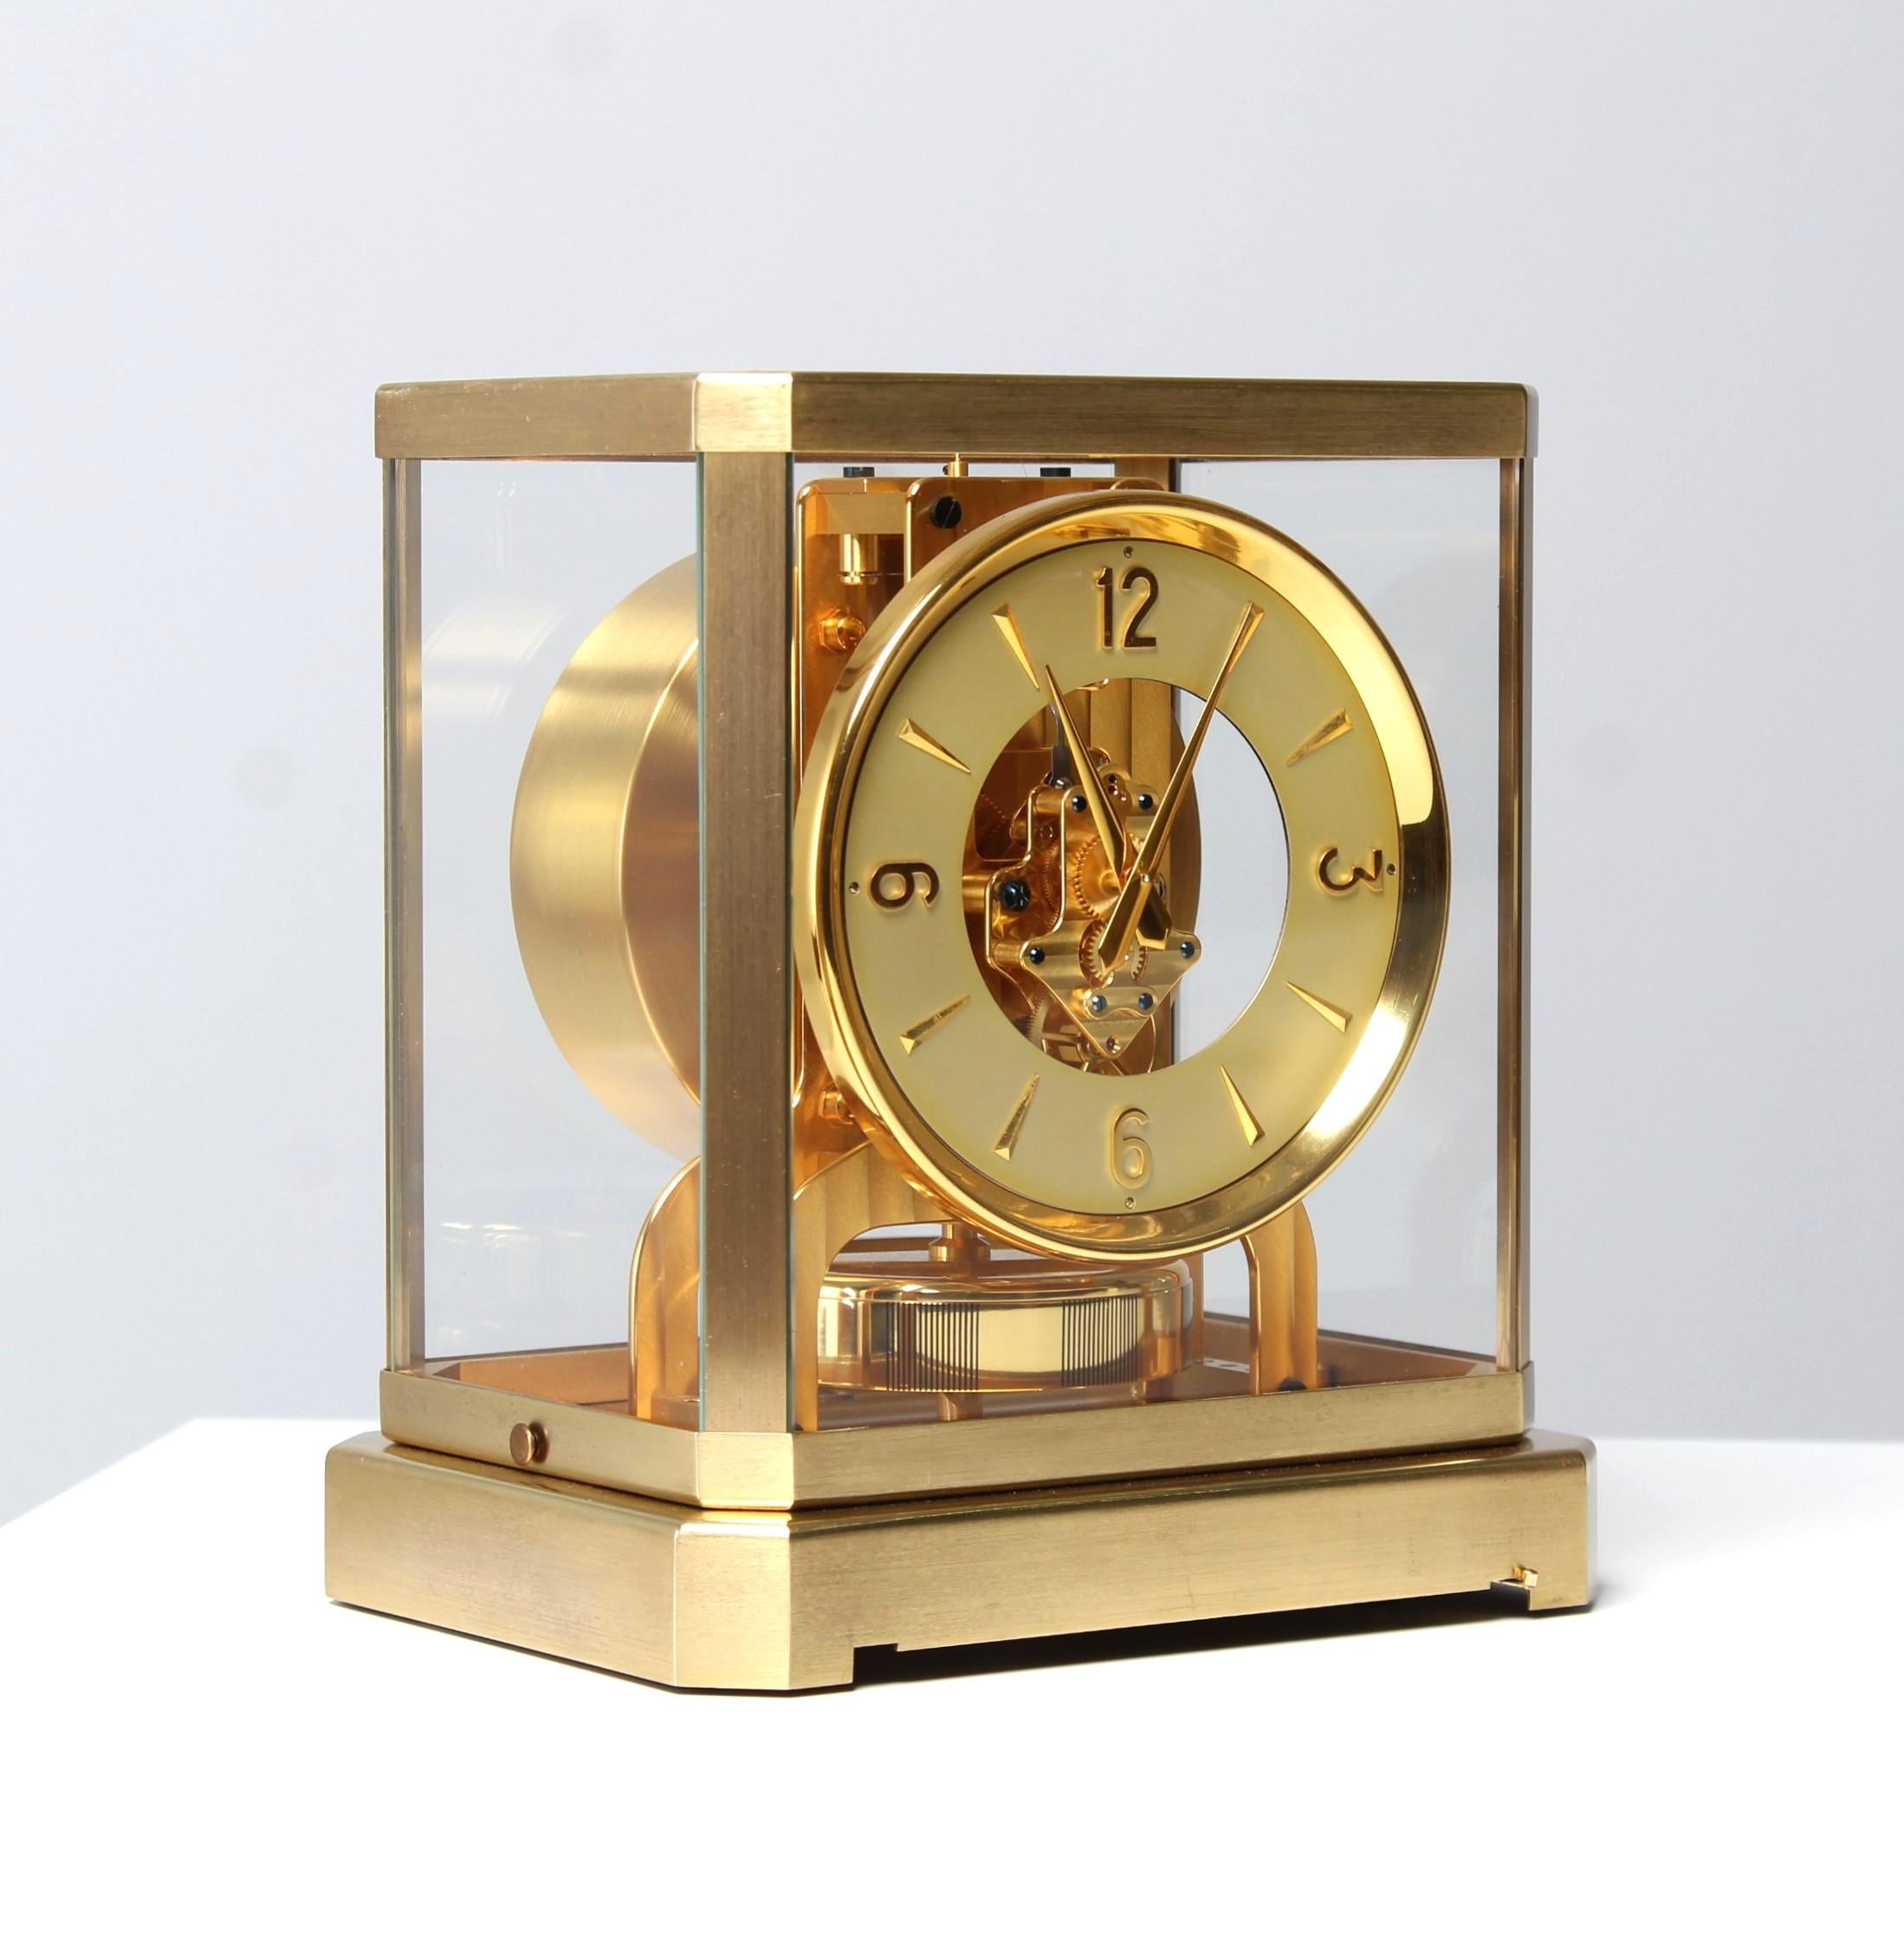 Atmos Clock by Jaeger LeCoultre, Classique Design, Manufactured in 1950 For Sale 6